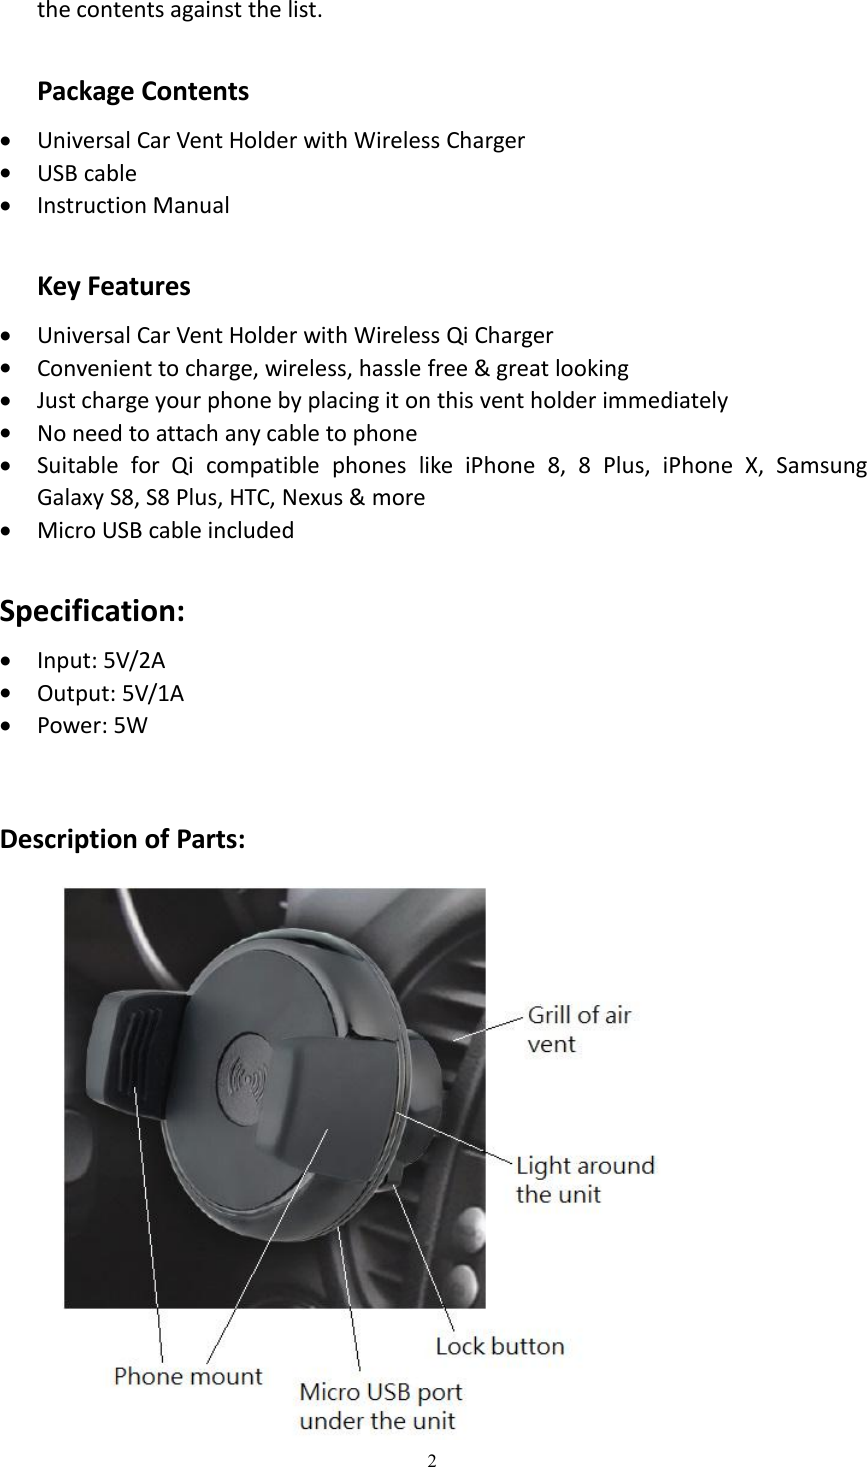 Page 2 of Minsuo CS-194 Car Air Vent Wireless Charging Holder User Manual 